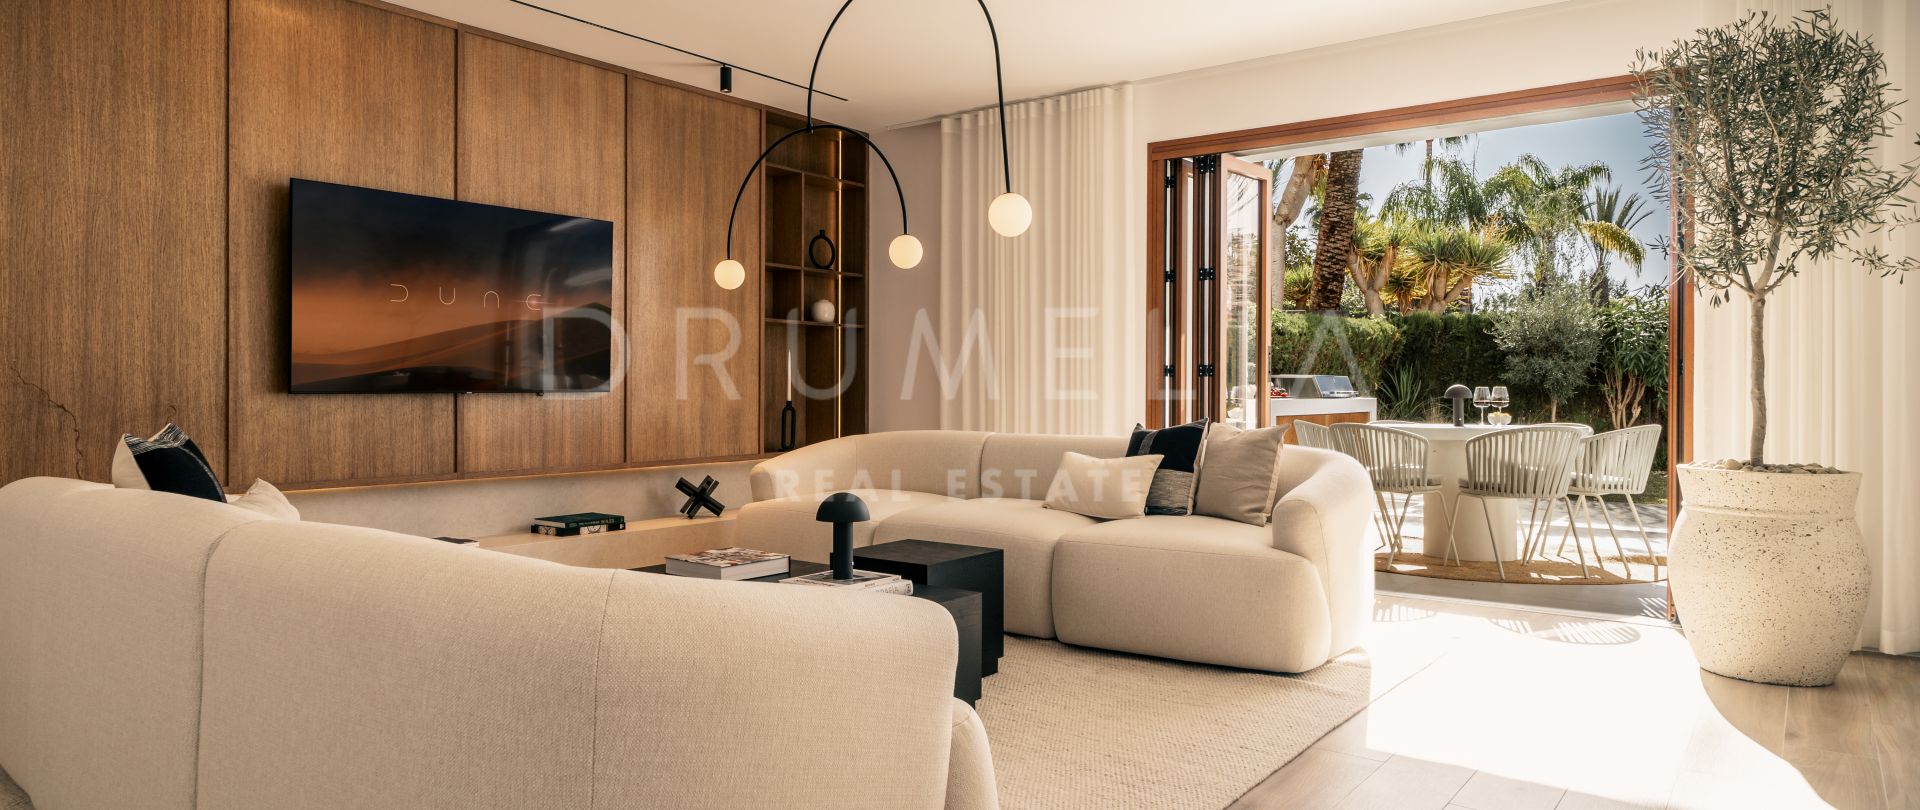 Charming and Newly Renovated Scandinavian Style Townhouse in Nueva Andalucia, Marbella